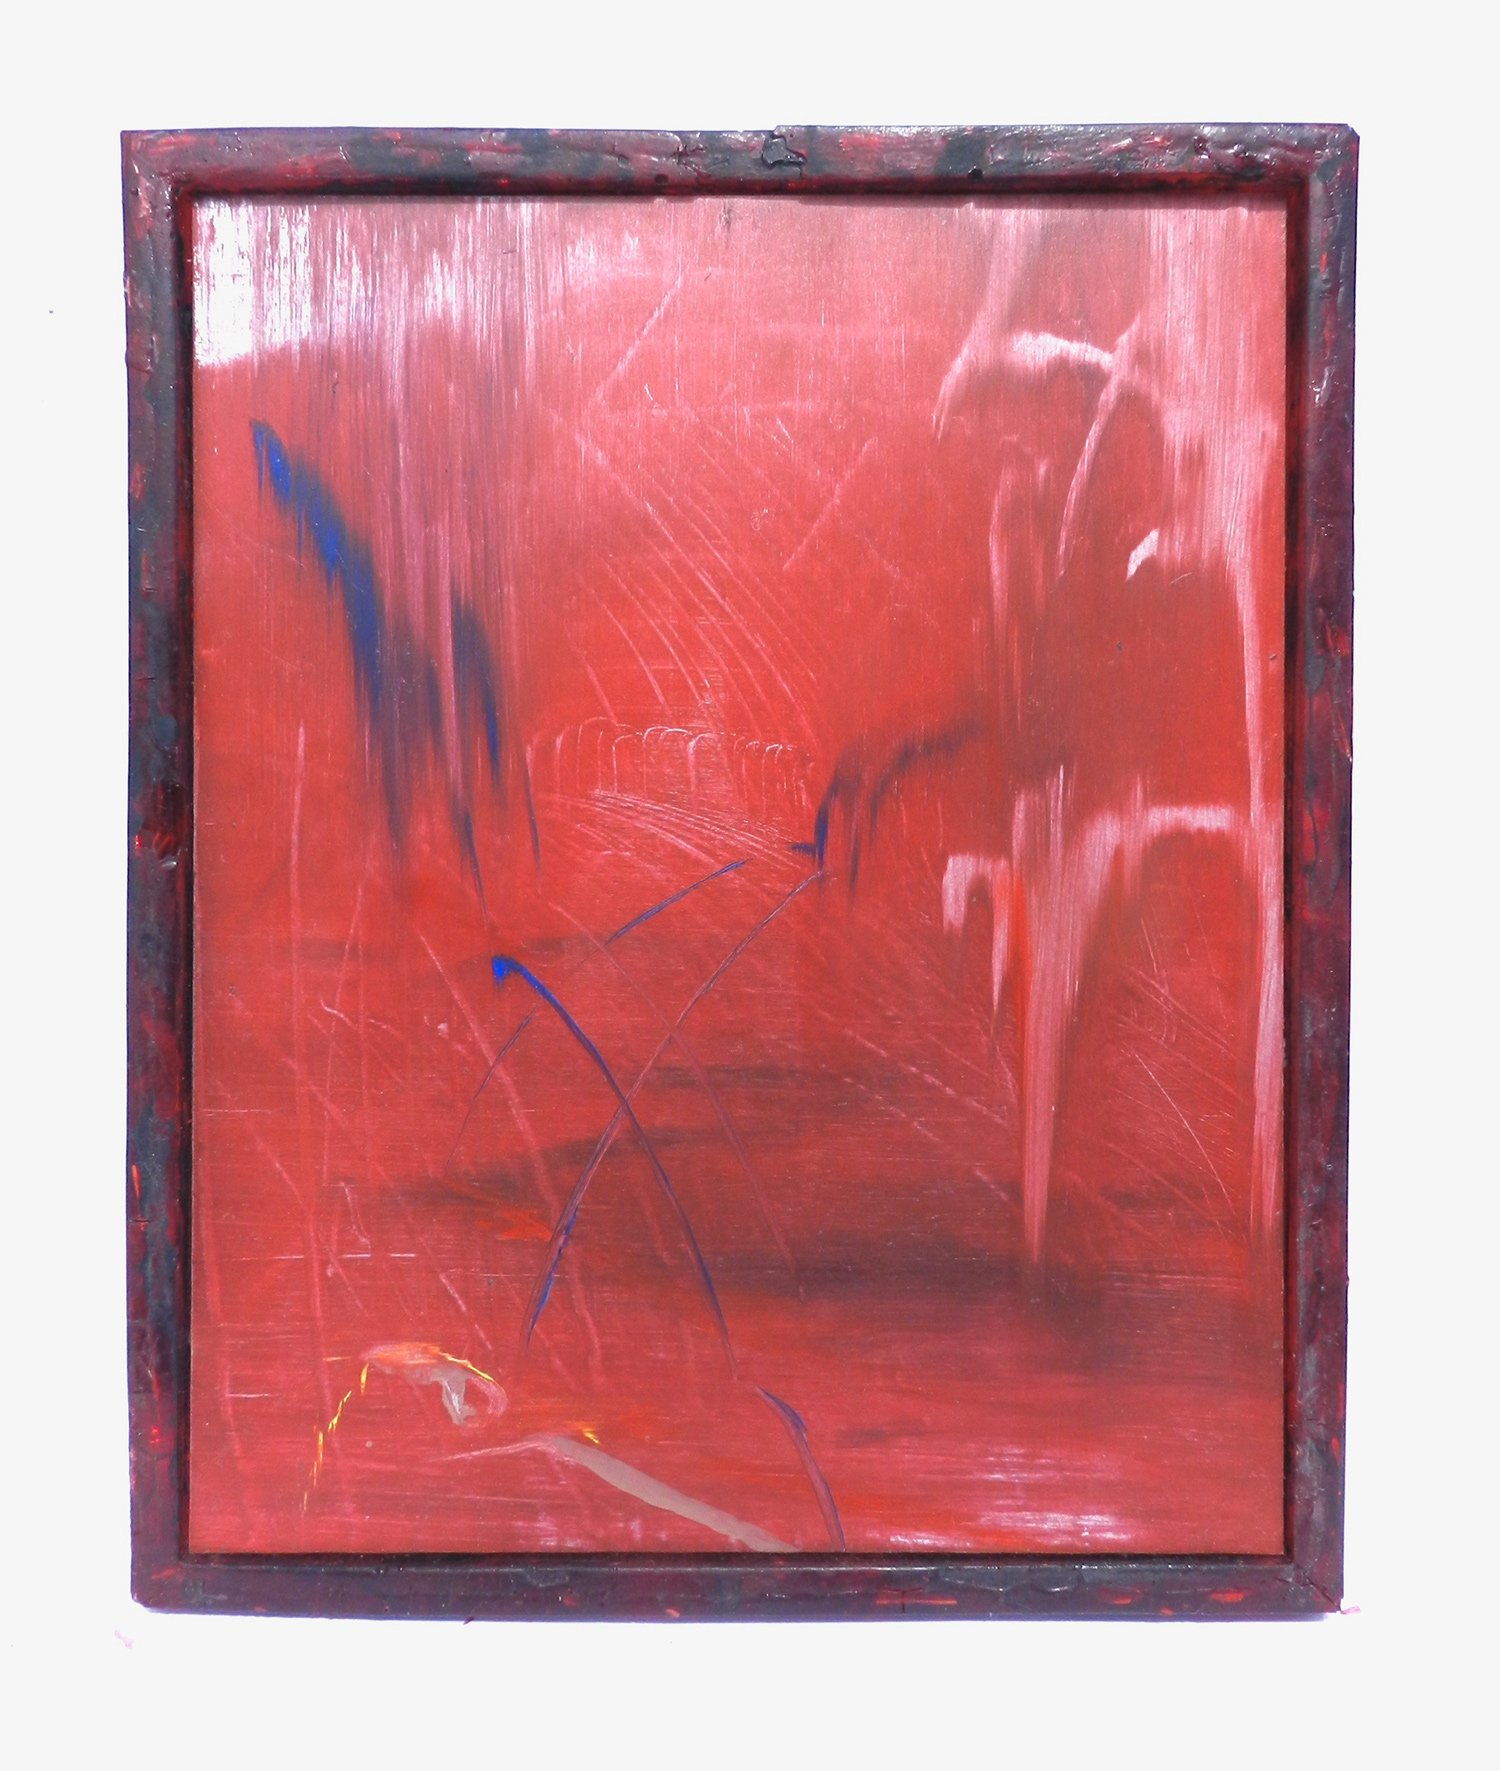  Night Stairs, oil on aluminium, cellophane and resin frame, 272 x 220 x 20 